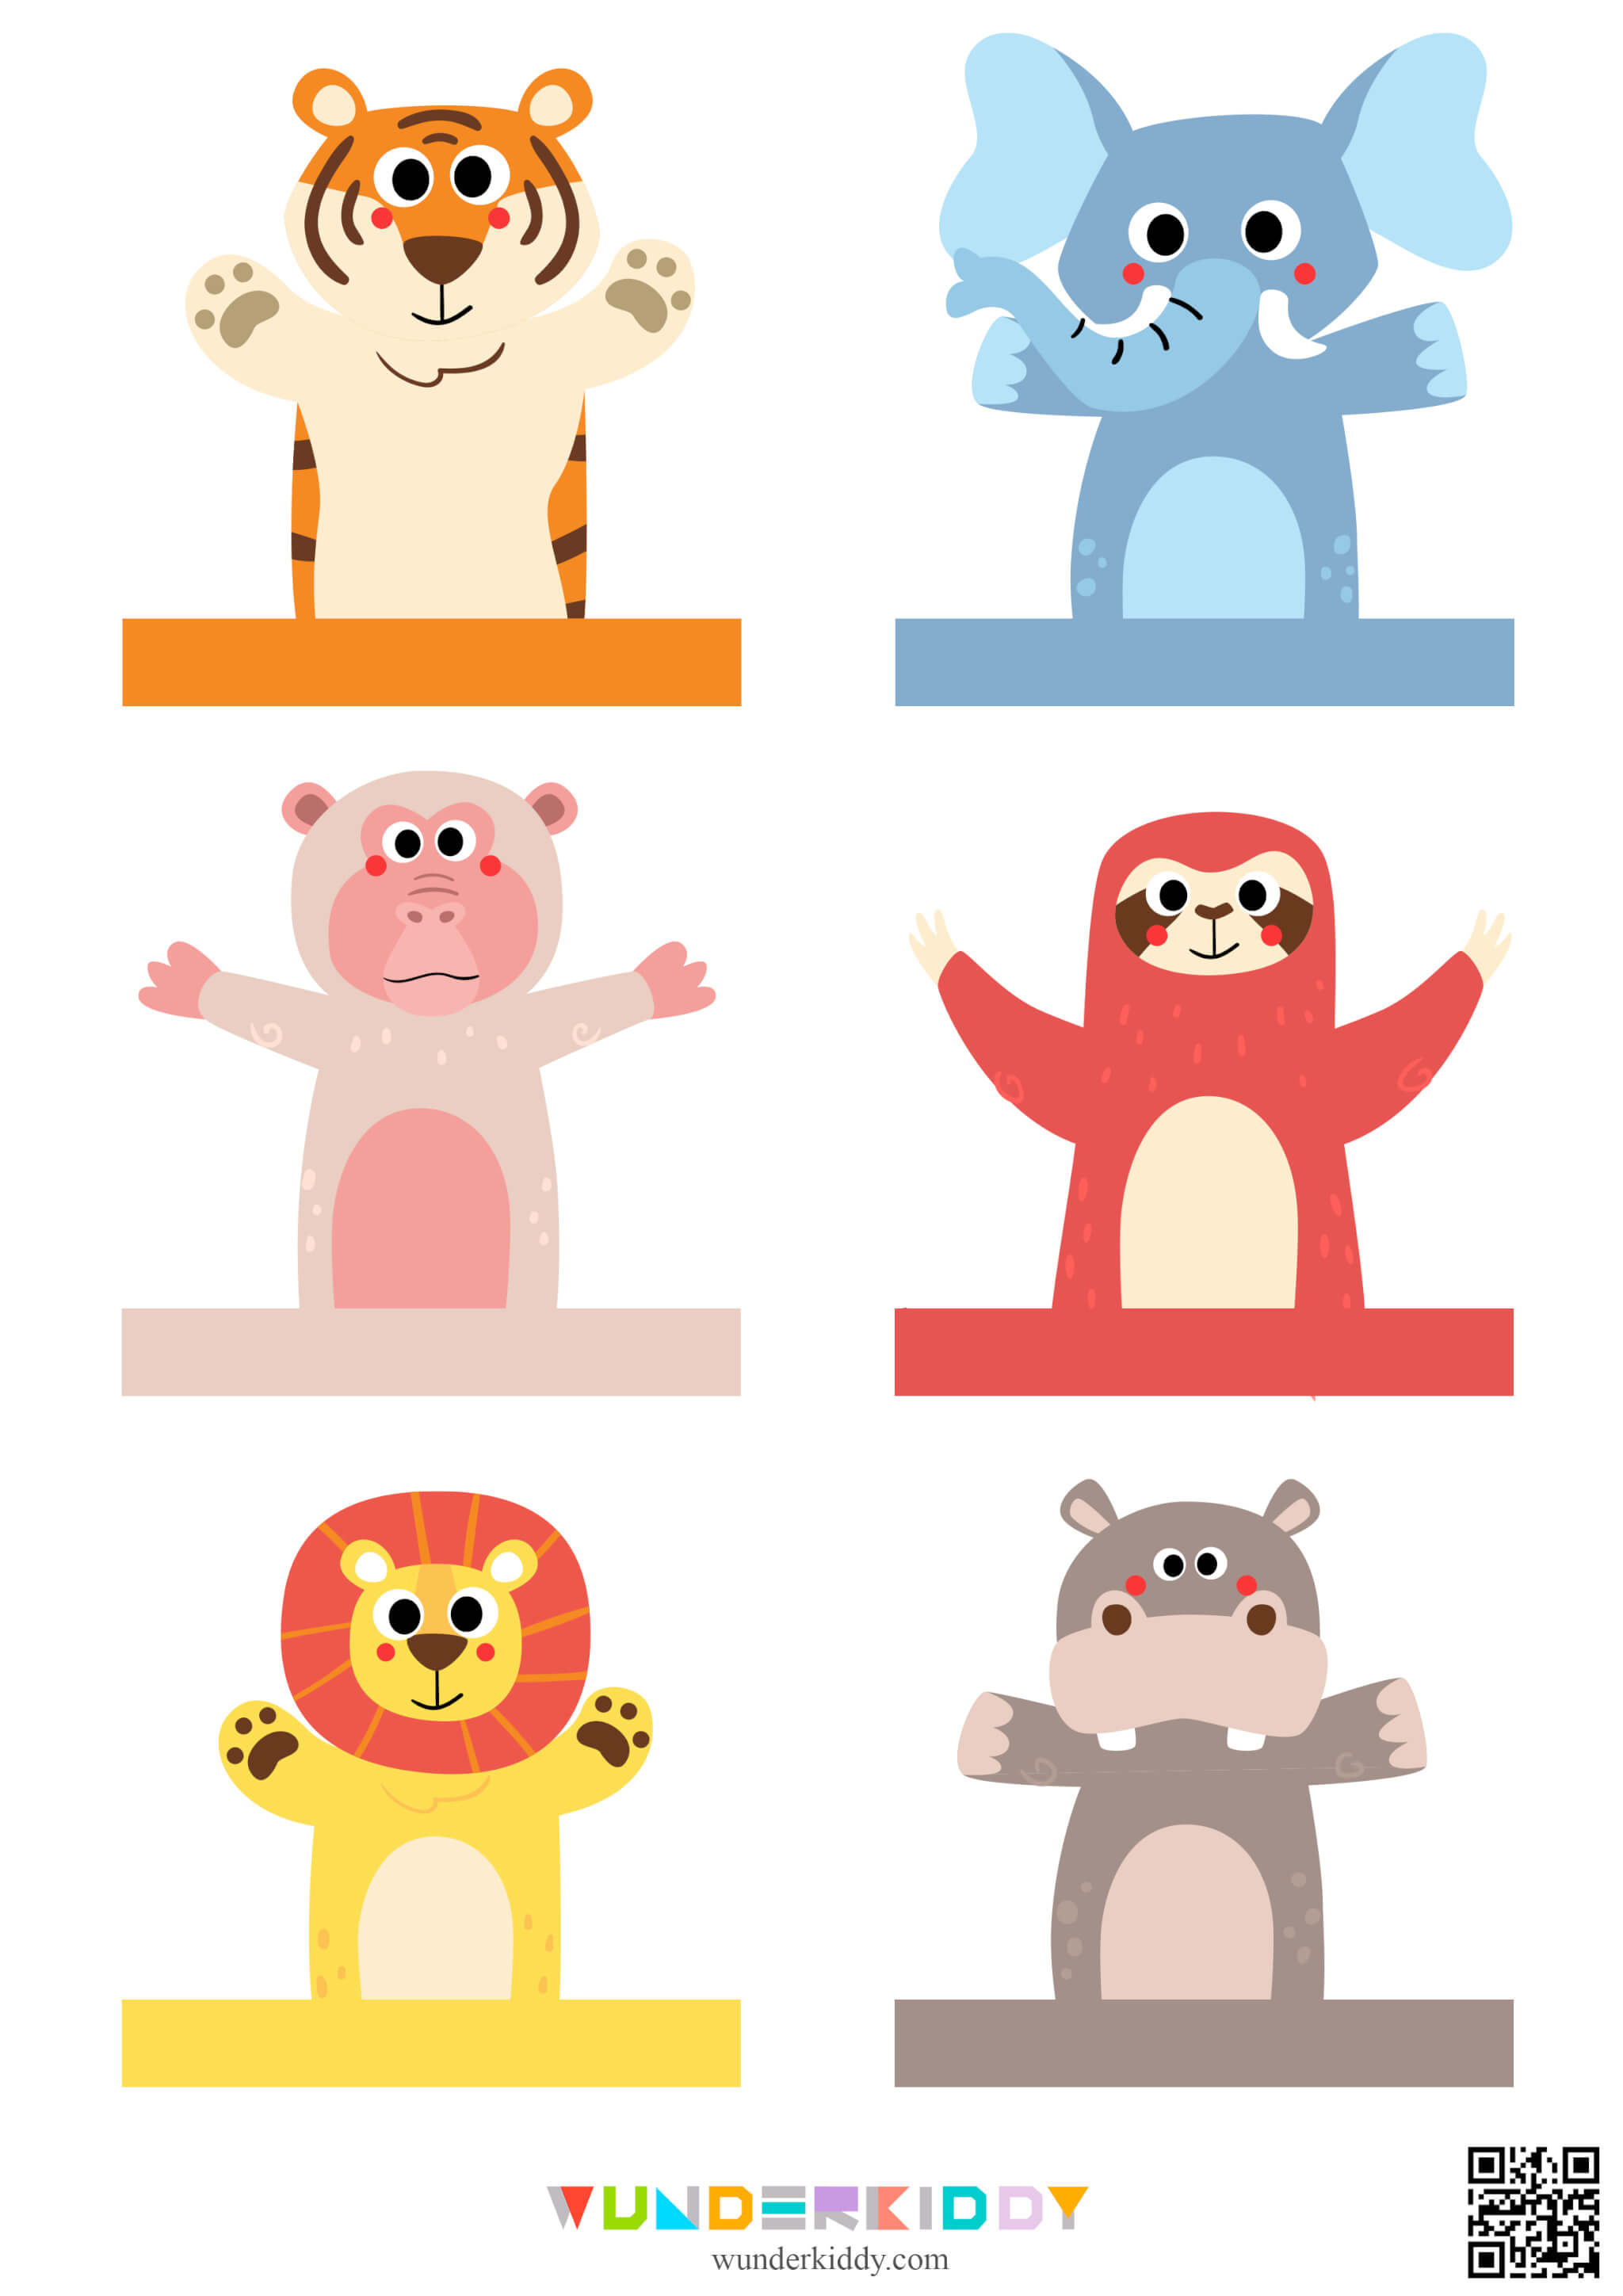 Templates of Animal Finger Puppets for Toddlers - Image 3